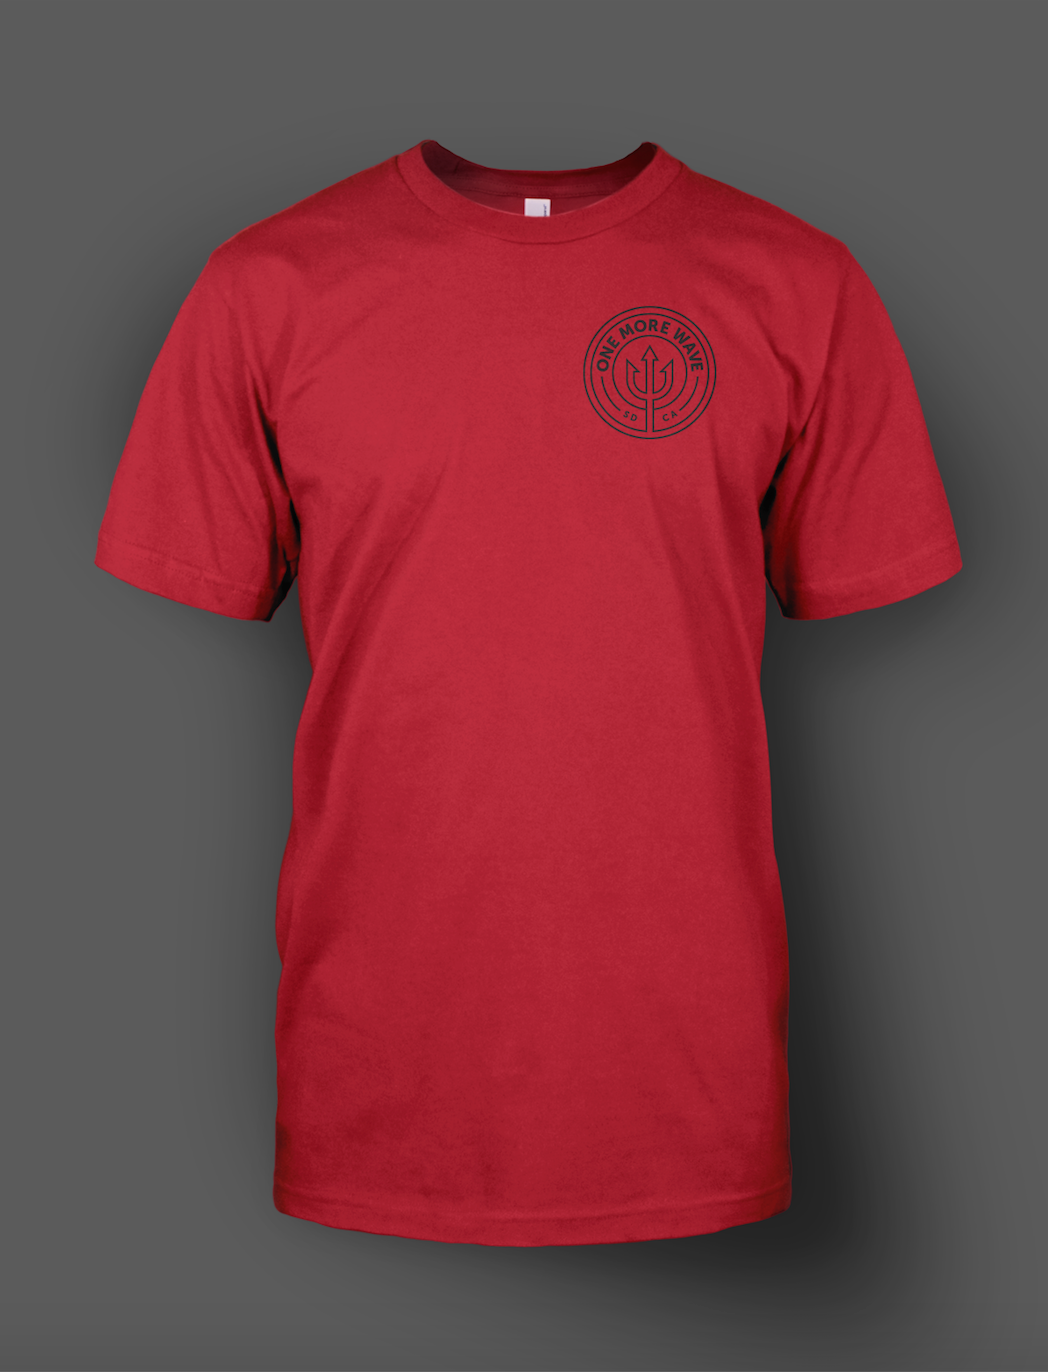 South Swell Limited Edition - Men’s Red T